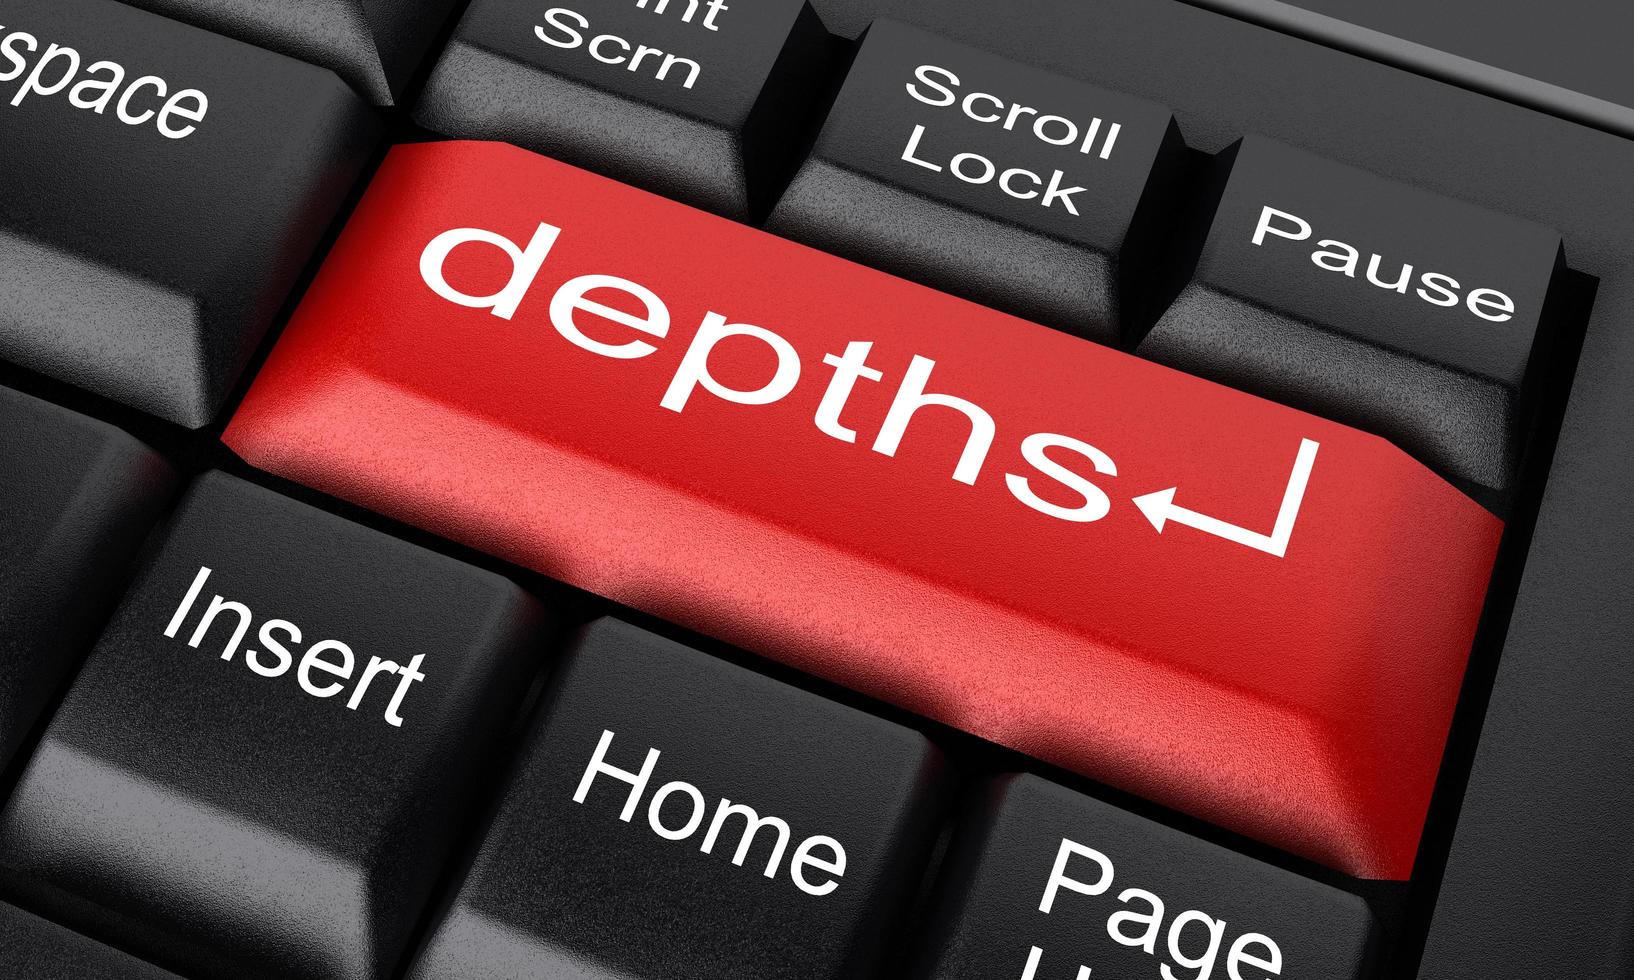 depths word on red keyboard button photo